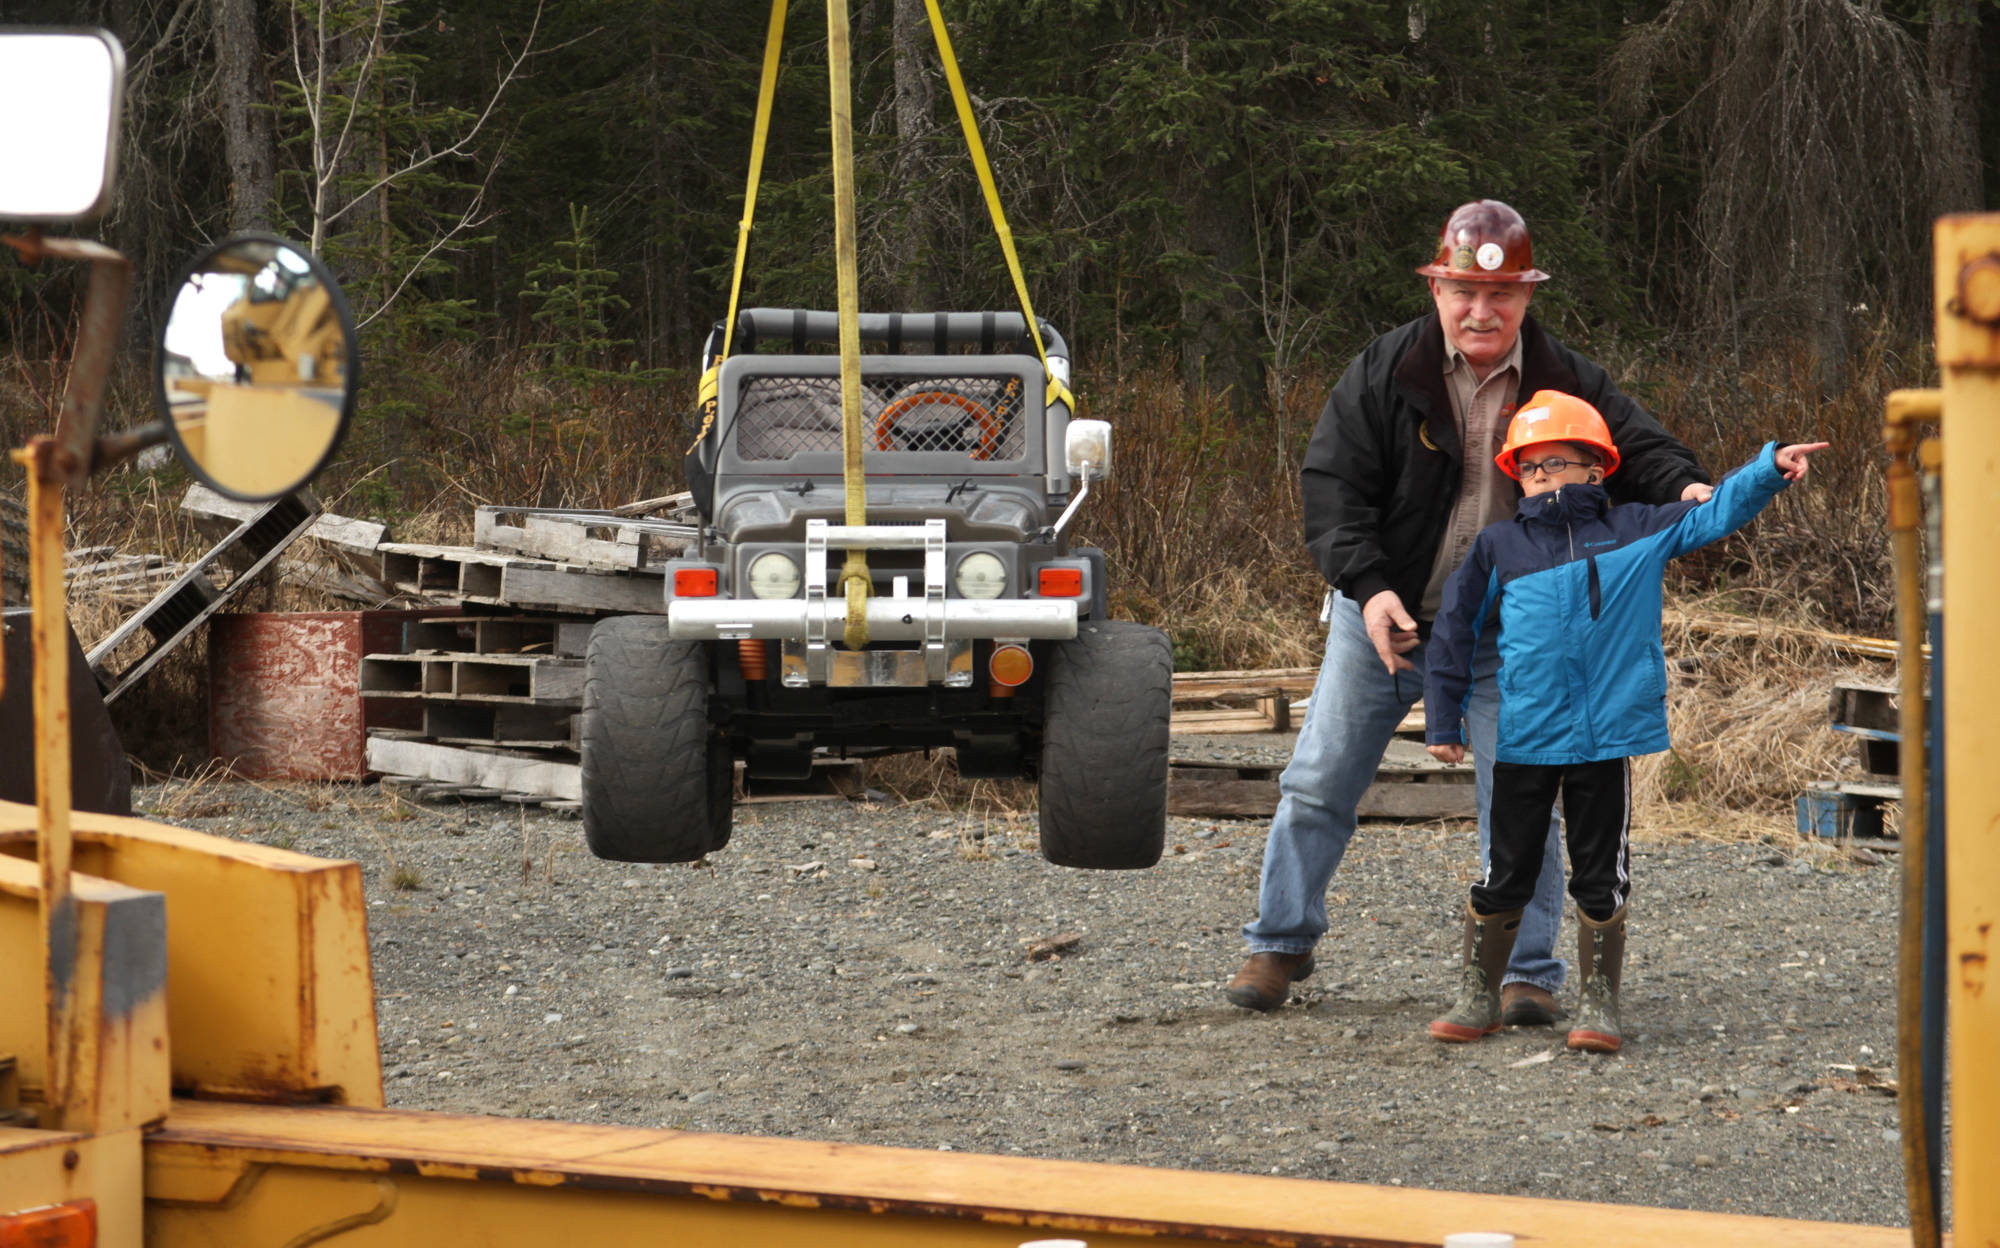 Peninsula Crane Consultants owner Bob Elmore guides Kalifornsky Beach Elementary first-grader Caleb Holper in giving hand signals to a fellow student moving a toy electric jeep with a crane during a field trip to Alaska Crane Consultants on Monday, May 7, 2018 on Kalifornsky Beach road. (Ben Boettger/Peninsula Clarion)